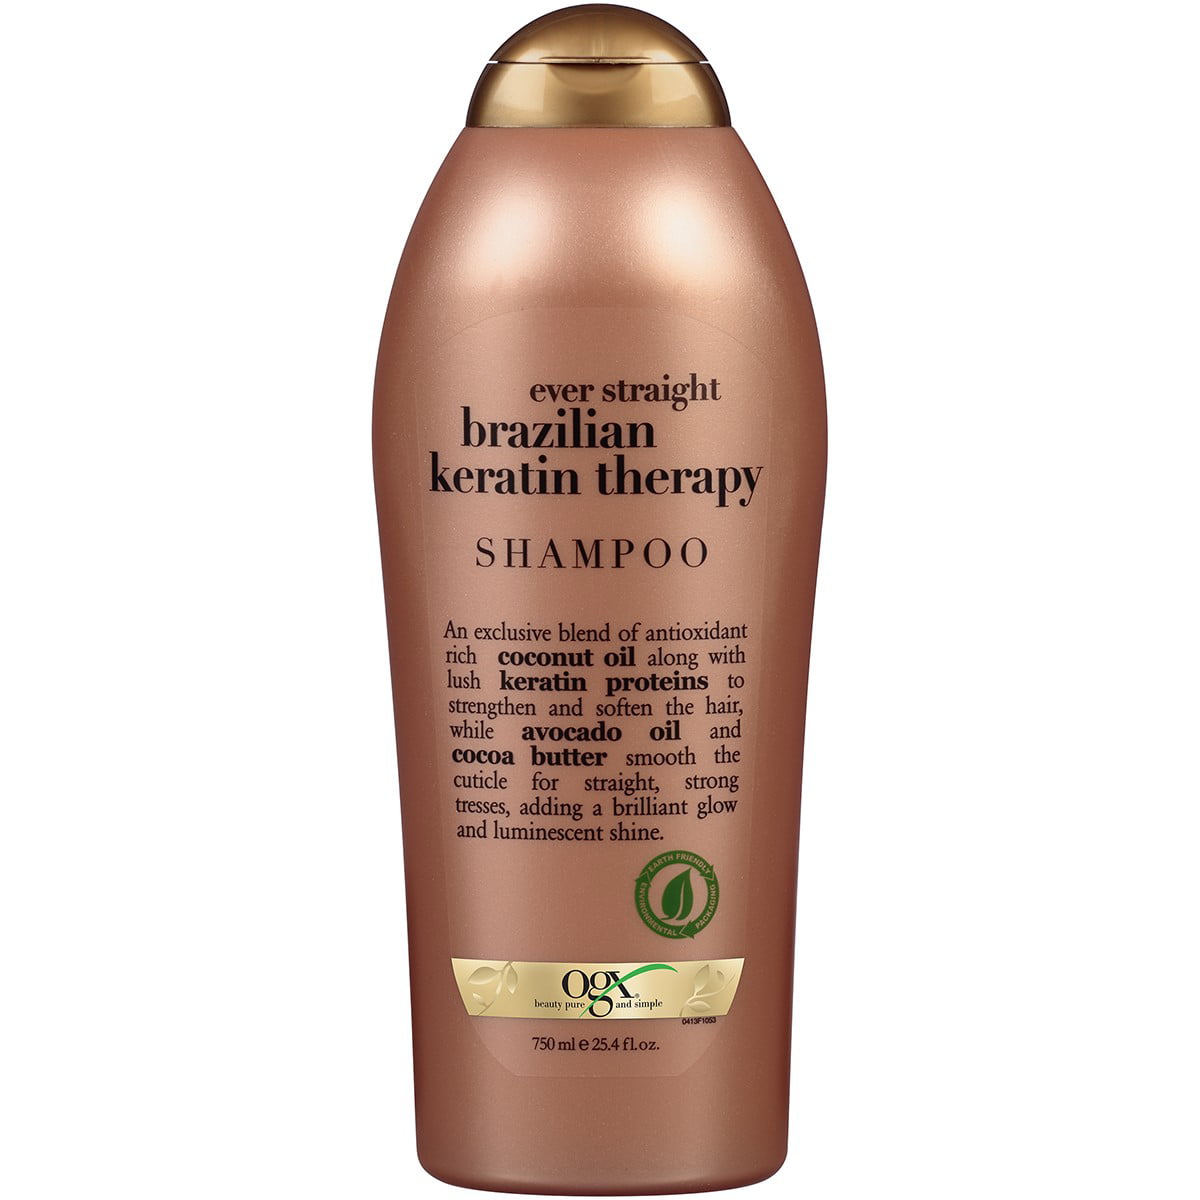 Straightening + Brazilian Keratin Therapy Smoothing Shampoo with Coconut Oil, Cocoa Butter Avocado Oil for Lustrous, Shiny Hair, Paraben-Free, Surfactants, 25.4 Fl Oz - Walmart.com